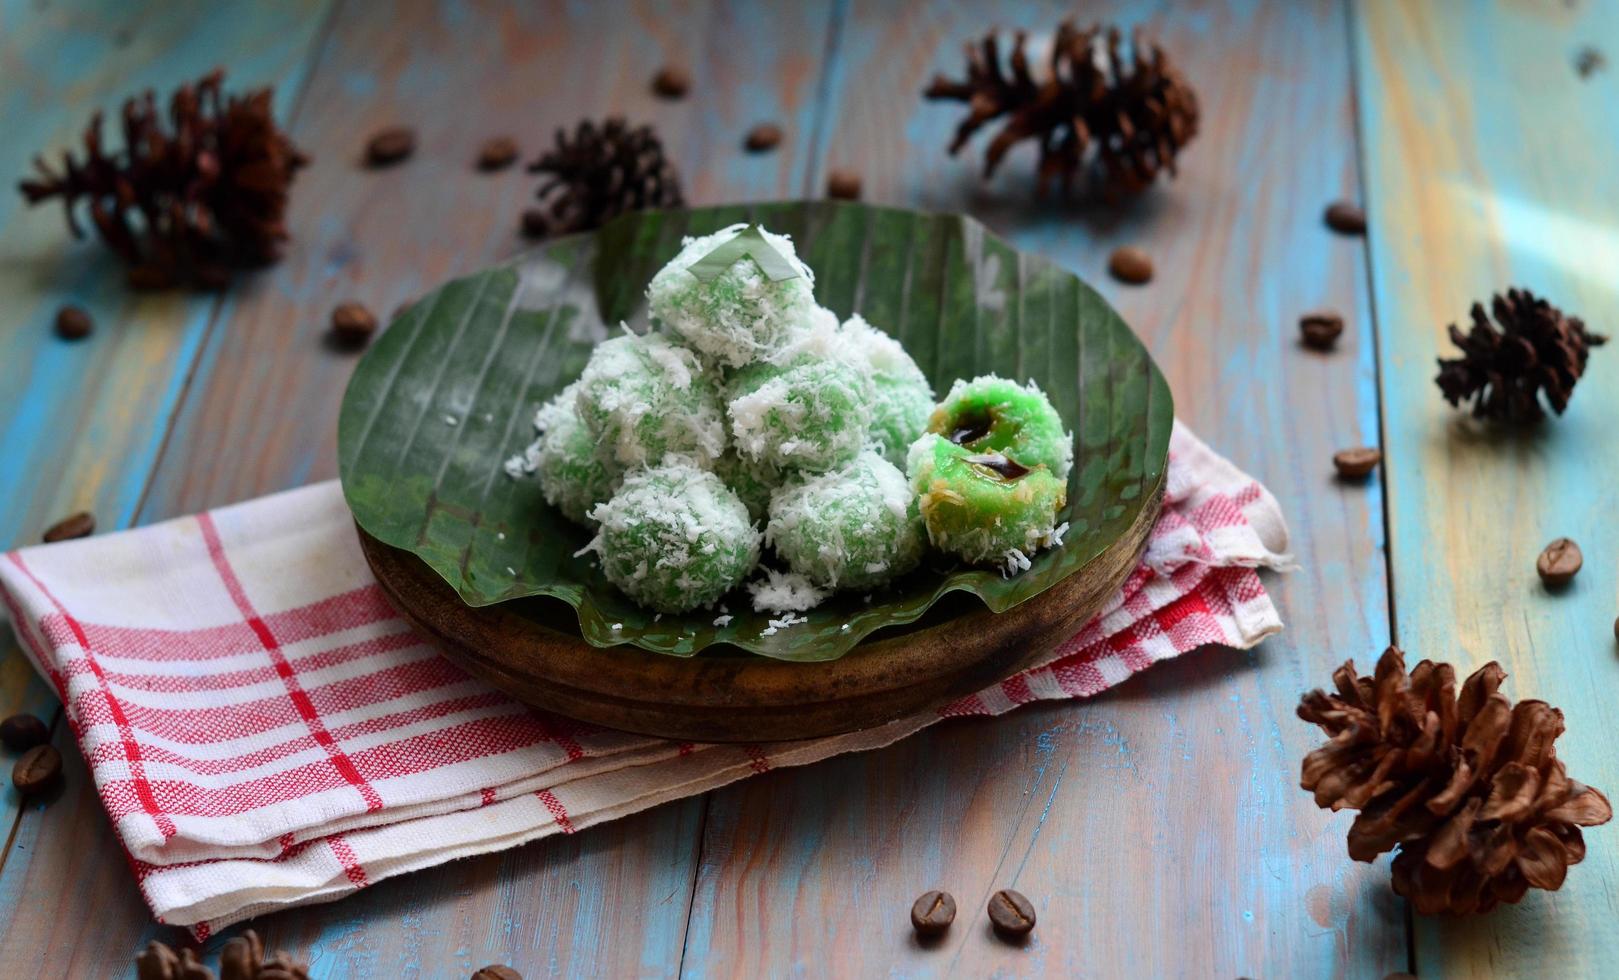 Klepon or kelepon is one of Indonesia's traditional cakes made from glutinous rice flour which is shaped like small balls and filled with brown sugar and then boiled photo